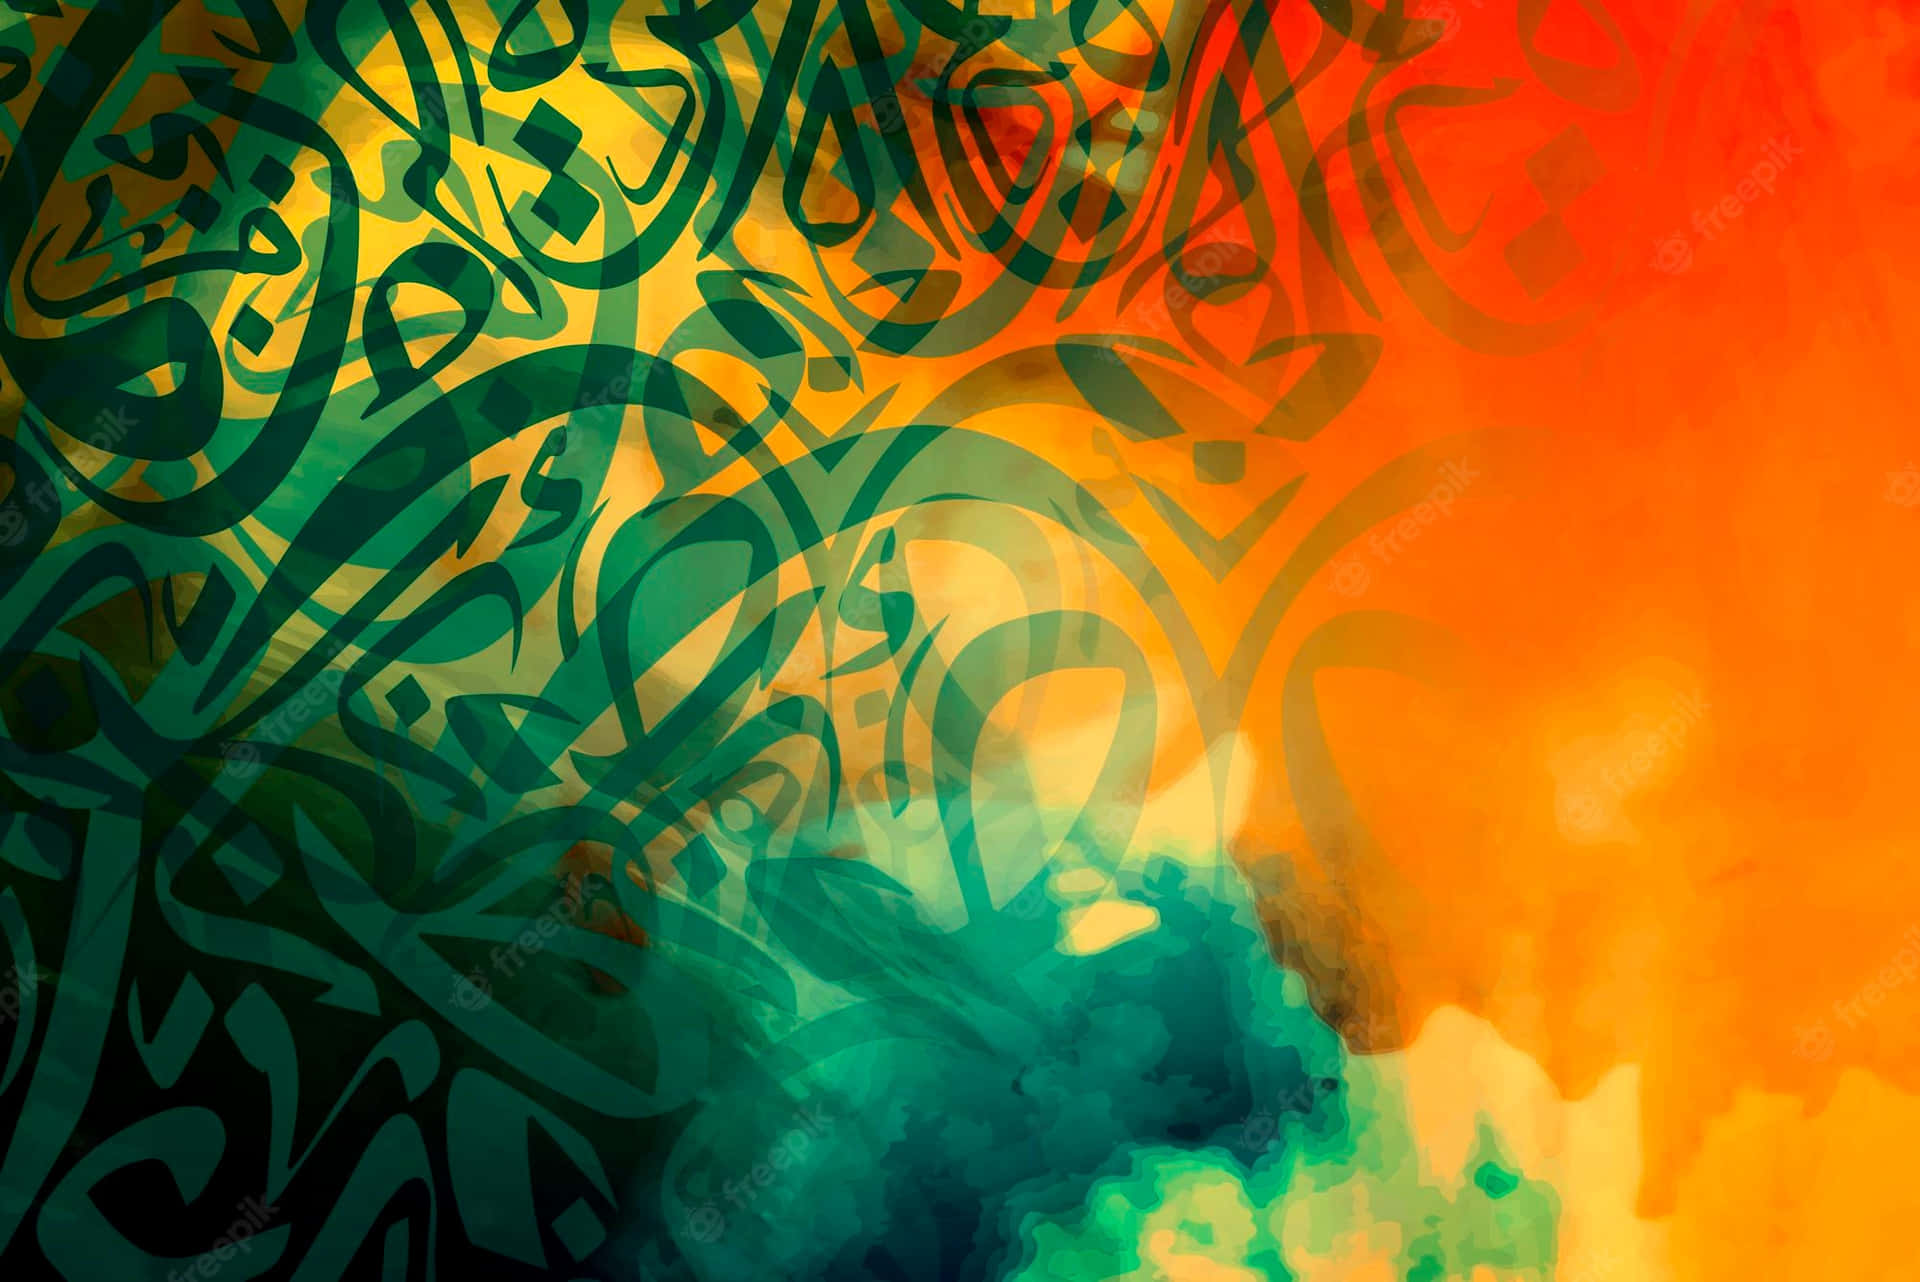 Islamic Calligraphy In Watercolor On A Colorful Background Wallpaper